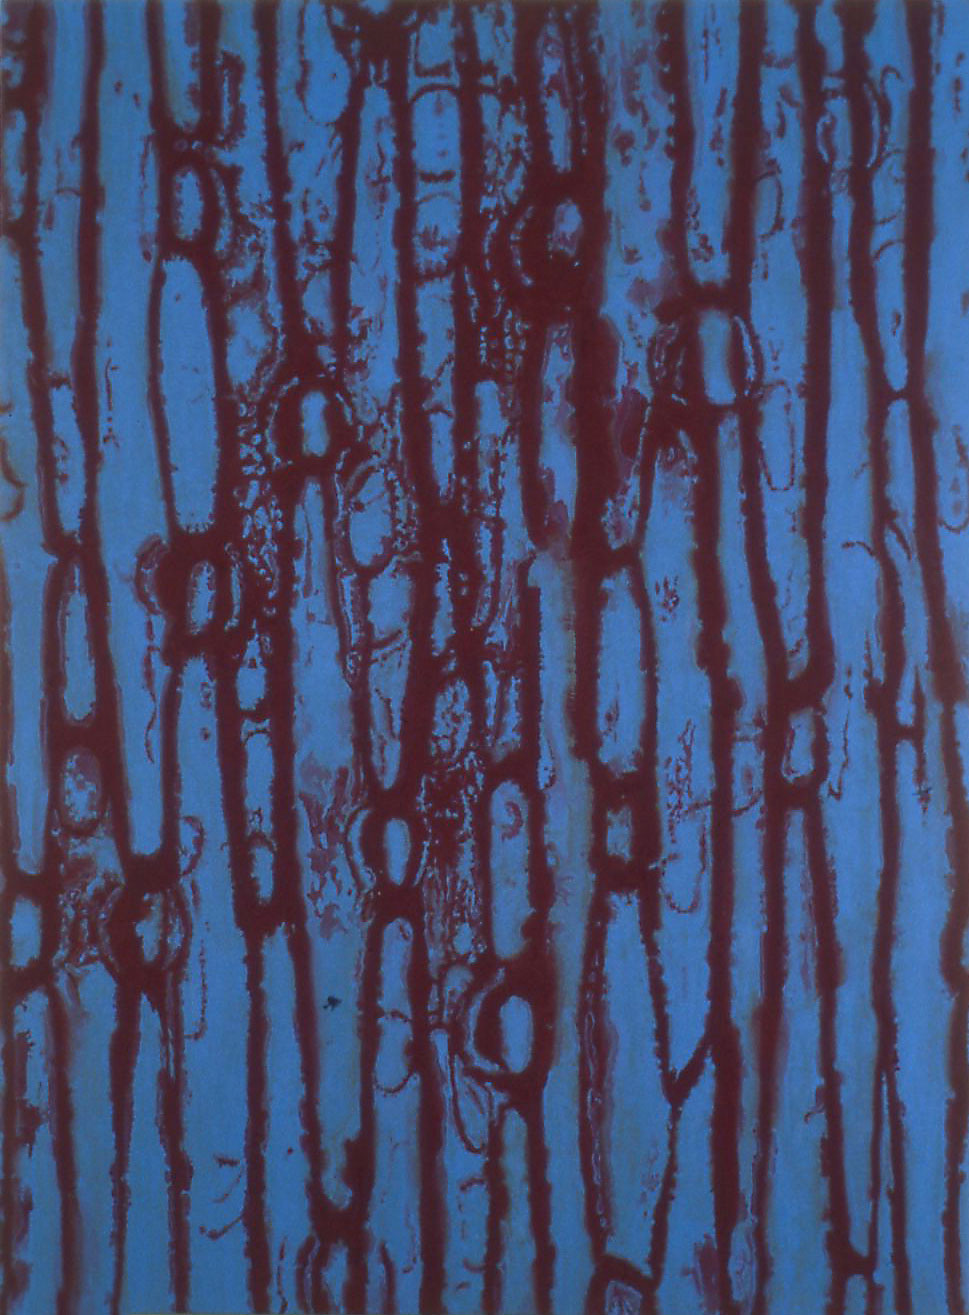 79a. Acrylic on board, 24 x 18 inches, 1998, collection of Thomas Isenberg